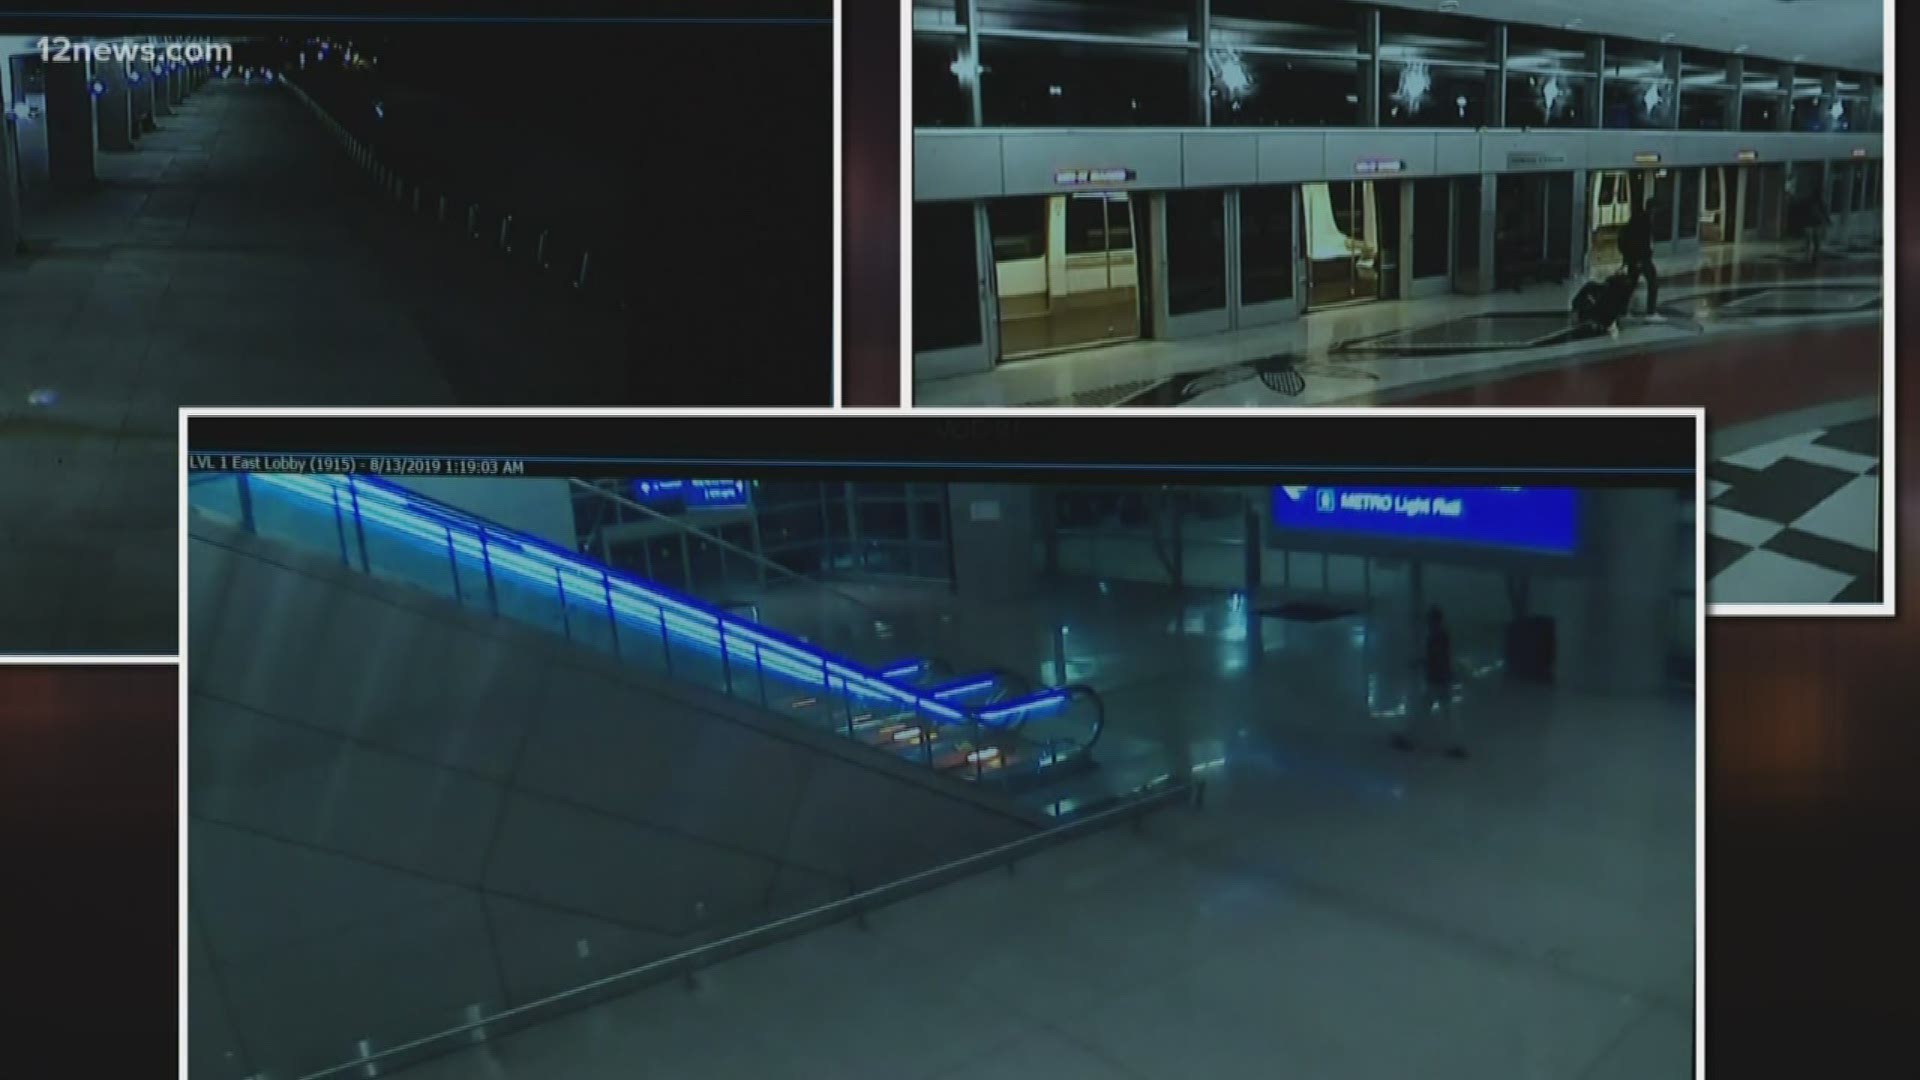 Three angles show brief clips of a security breach at Sky Harbor International Airport. The suspect was able to get on a plane and use the emergency slide.